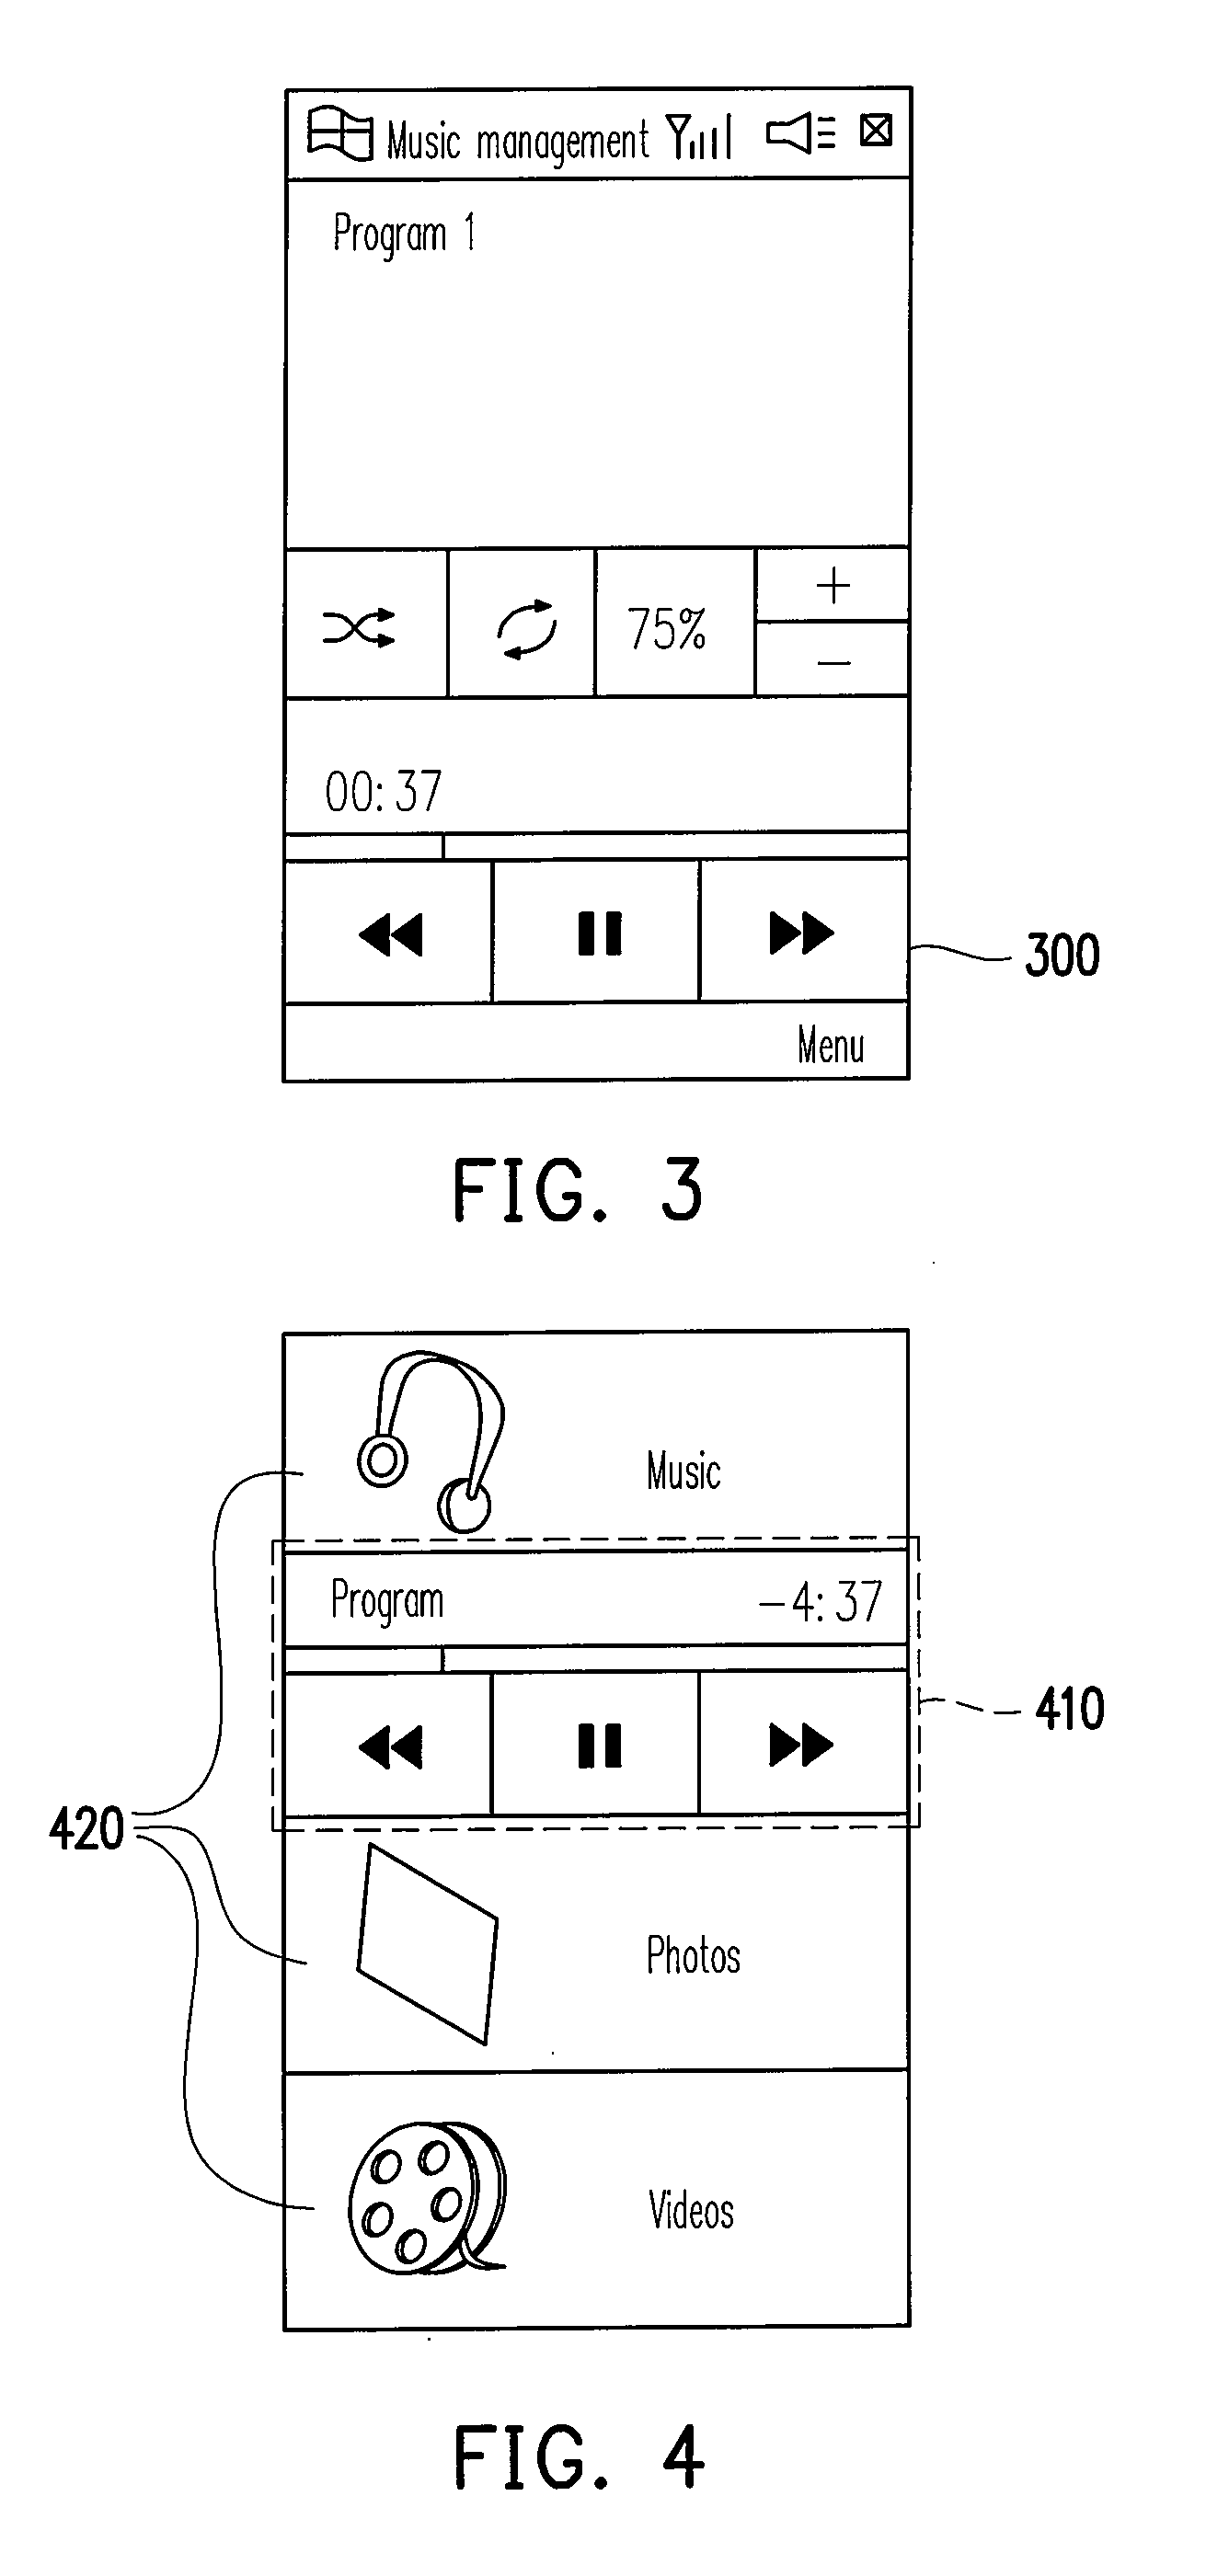 Graphical menu interface, implementing method thereof, and operating method thereof